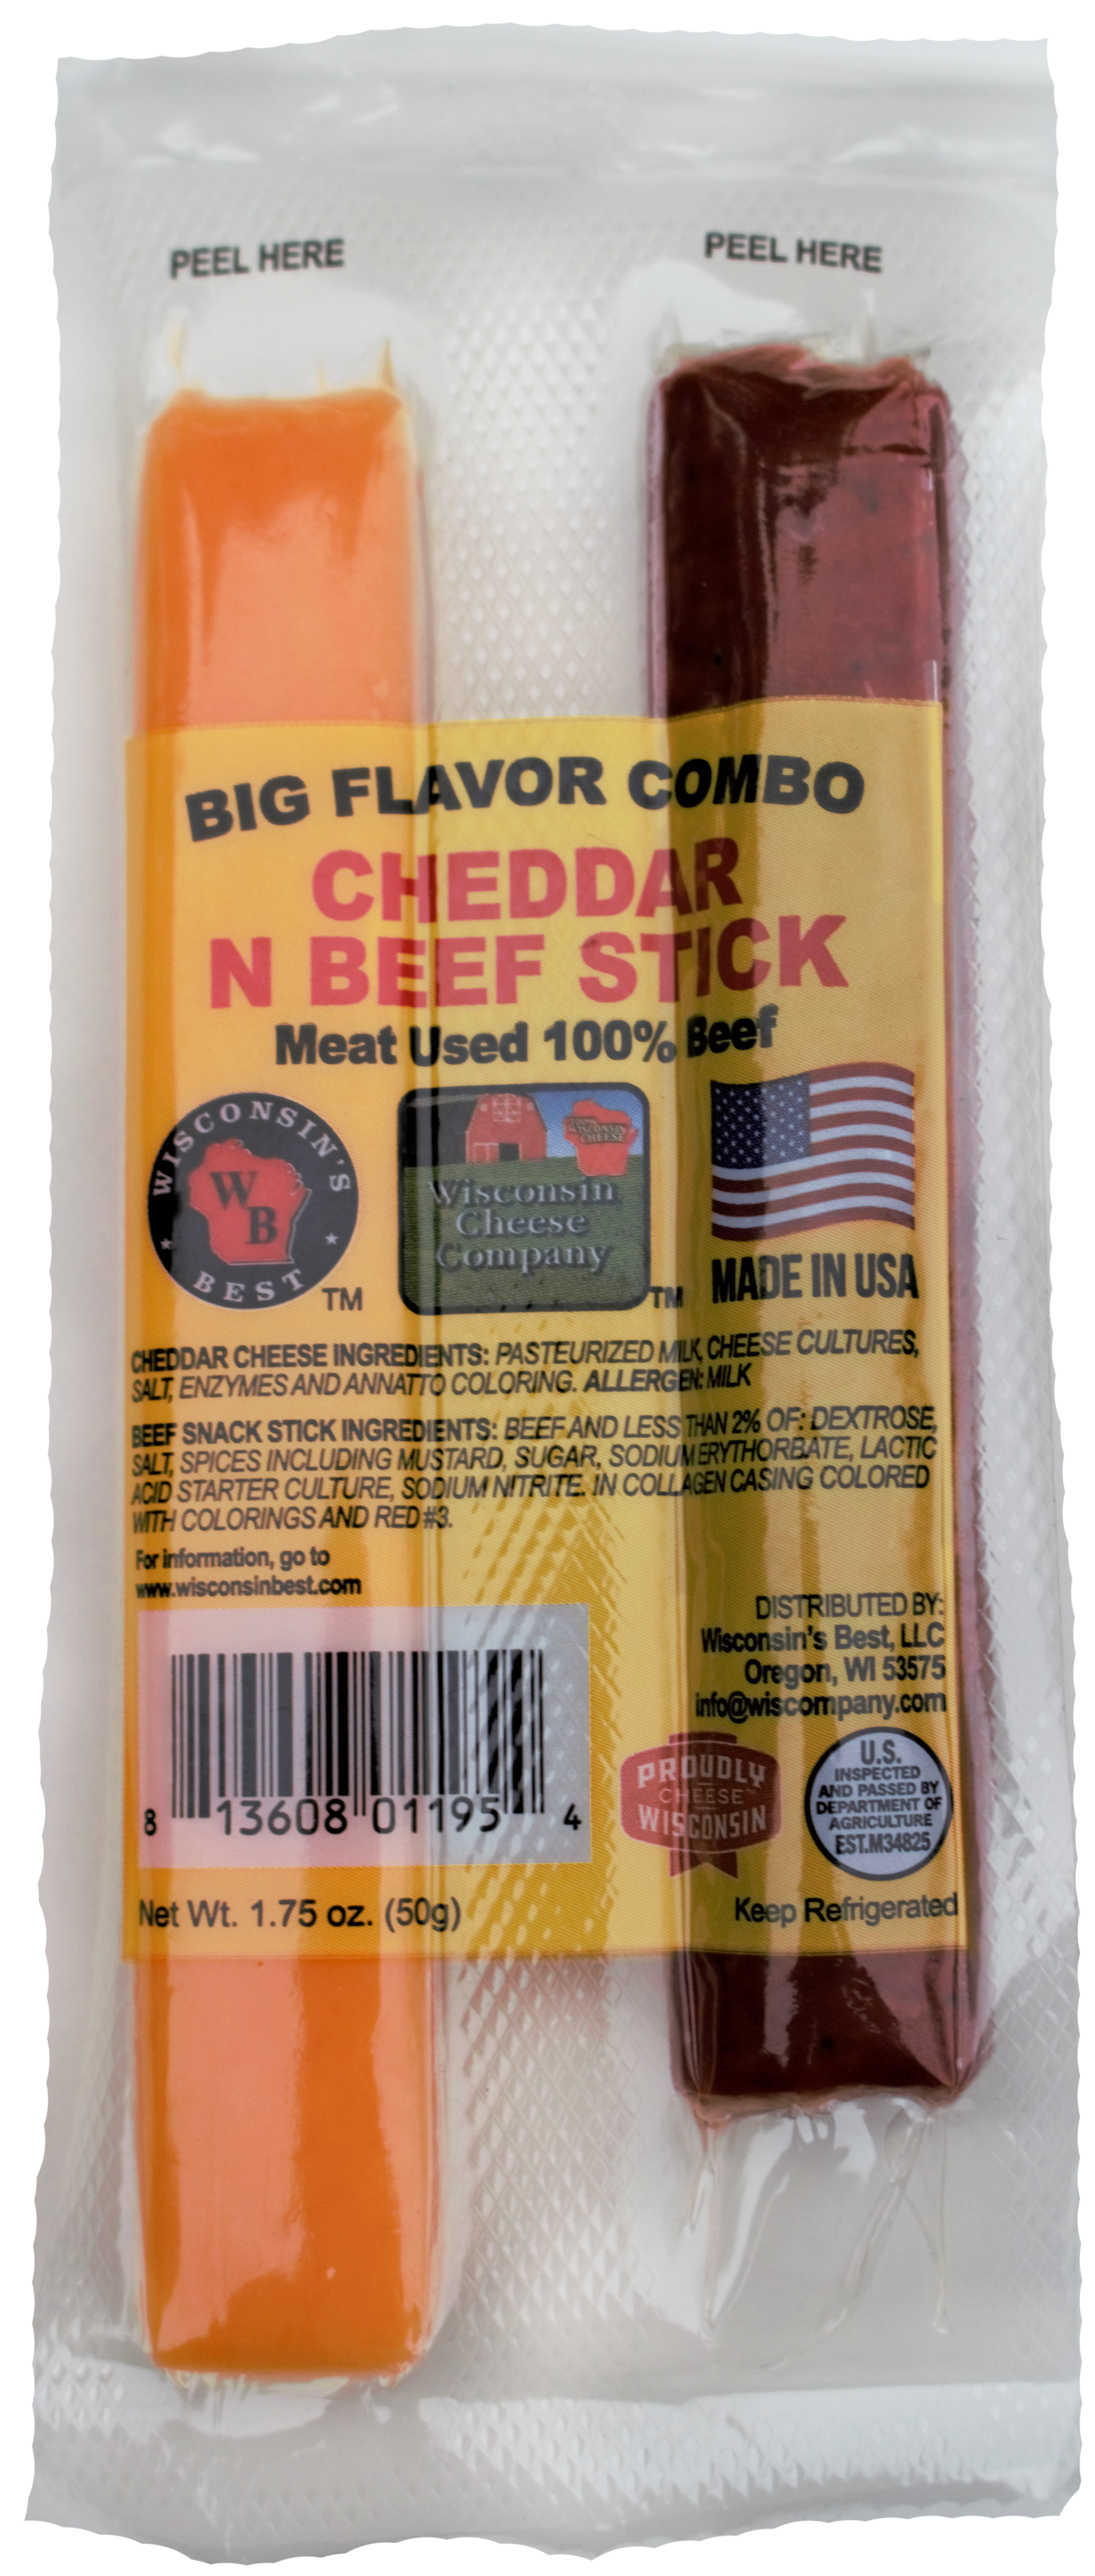 Cheddar Cheese N Beef Stick combo pack